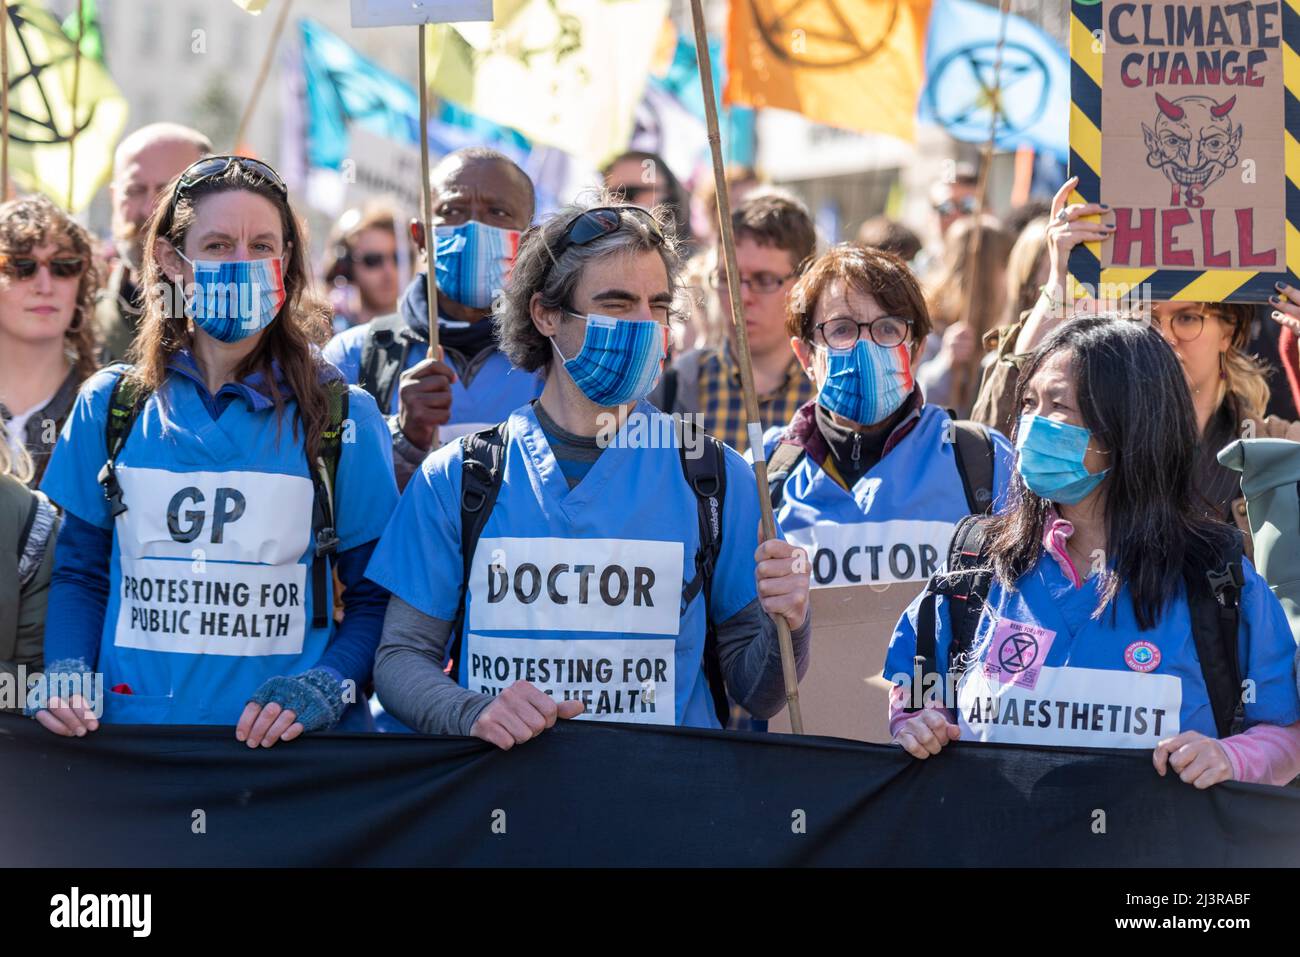 Westminster, London, UK. 9th Apr, 2022. Extinction Rebellion protesters have been blocking roads and disrupting traffic around central London, including Oxford Street, Regent Street and around Westminster. Health workers Stock Photo